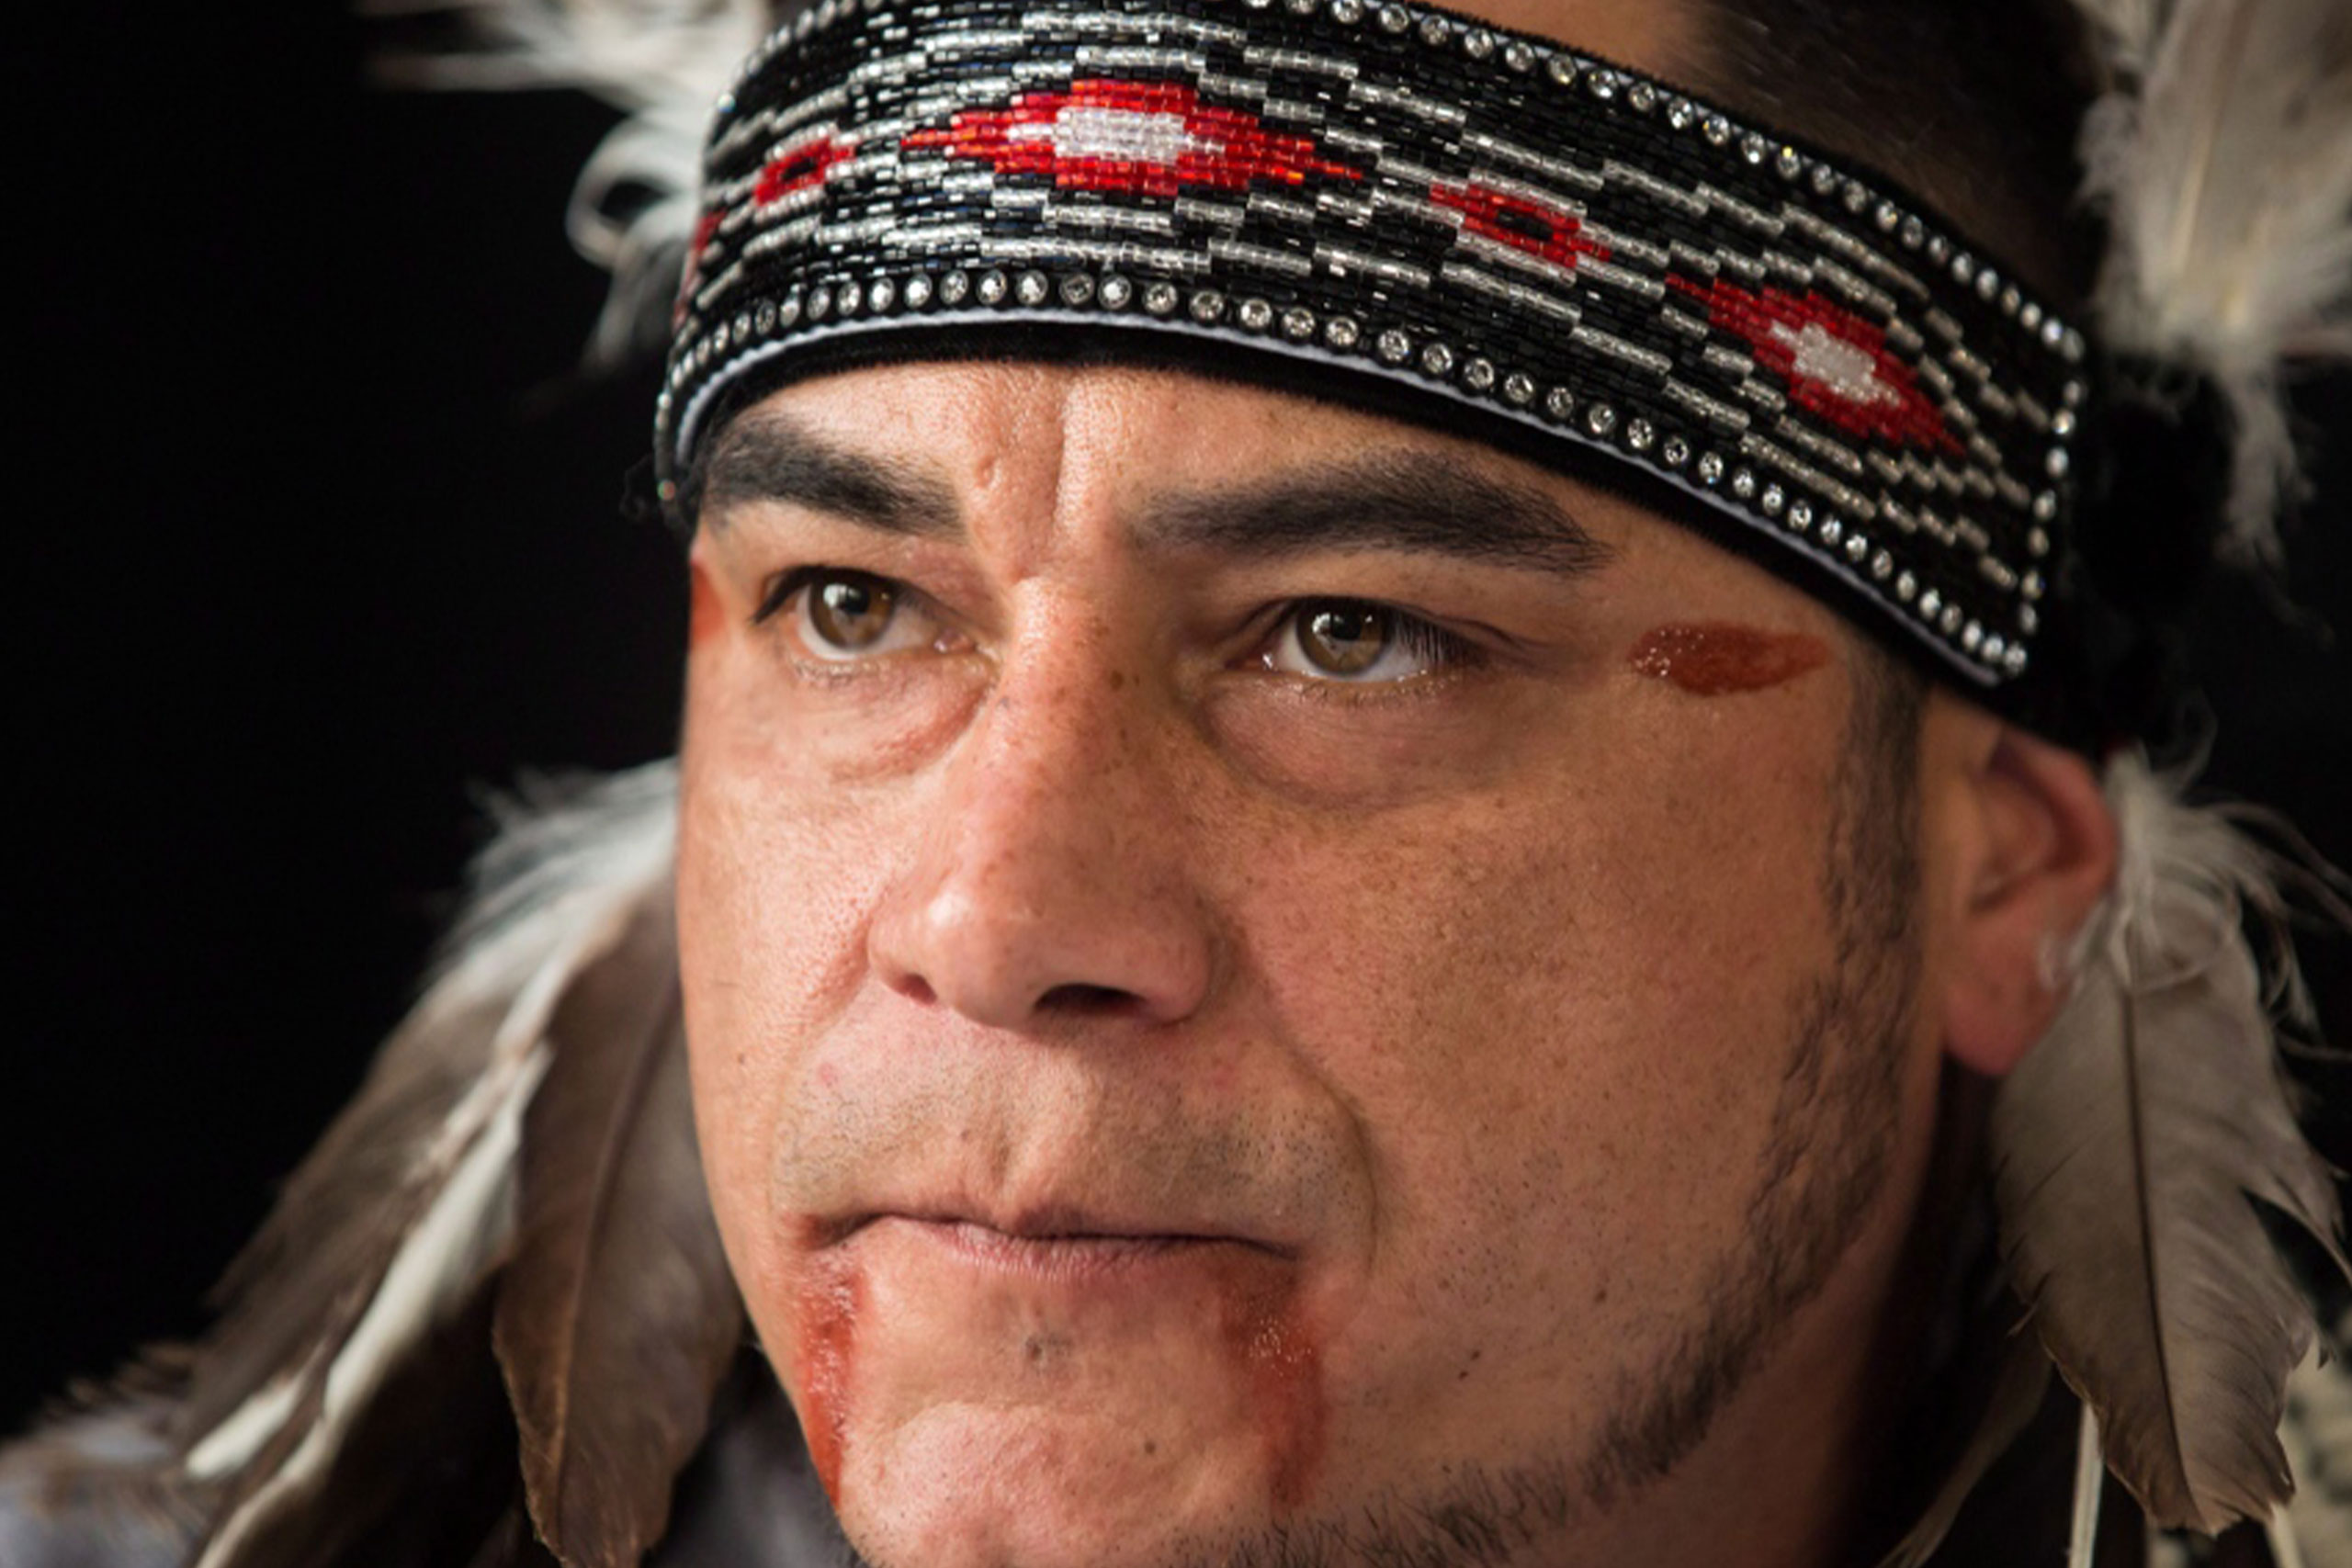 Indigenous Land Defender Sentenced for Protecting His Own Lands